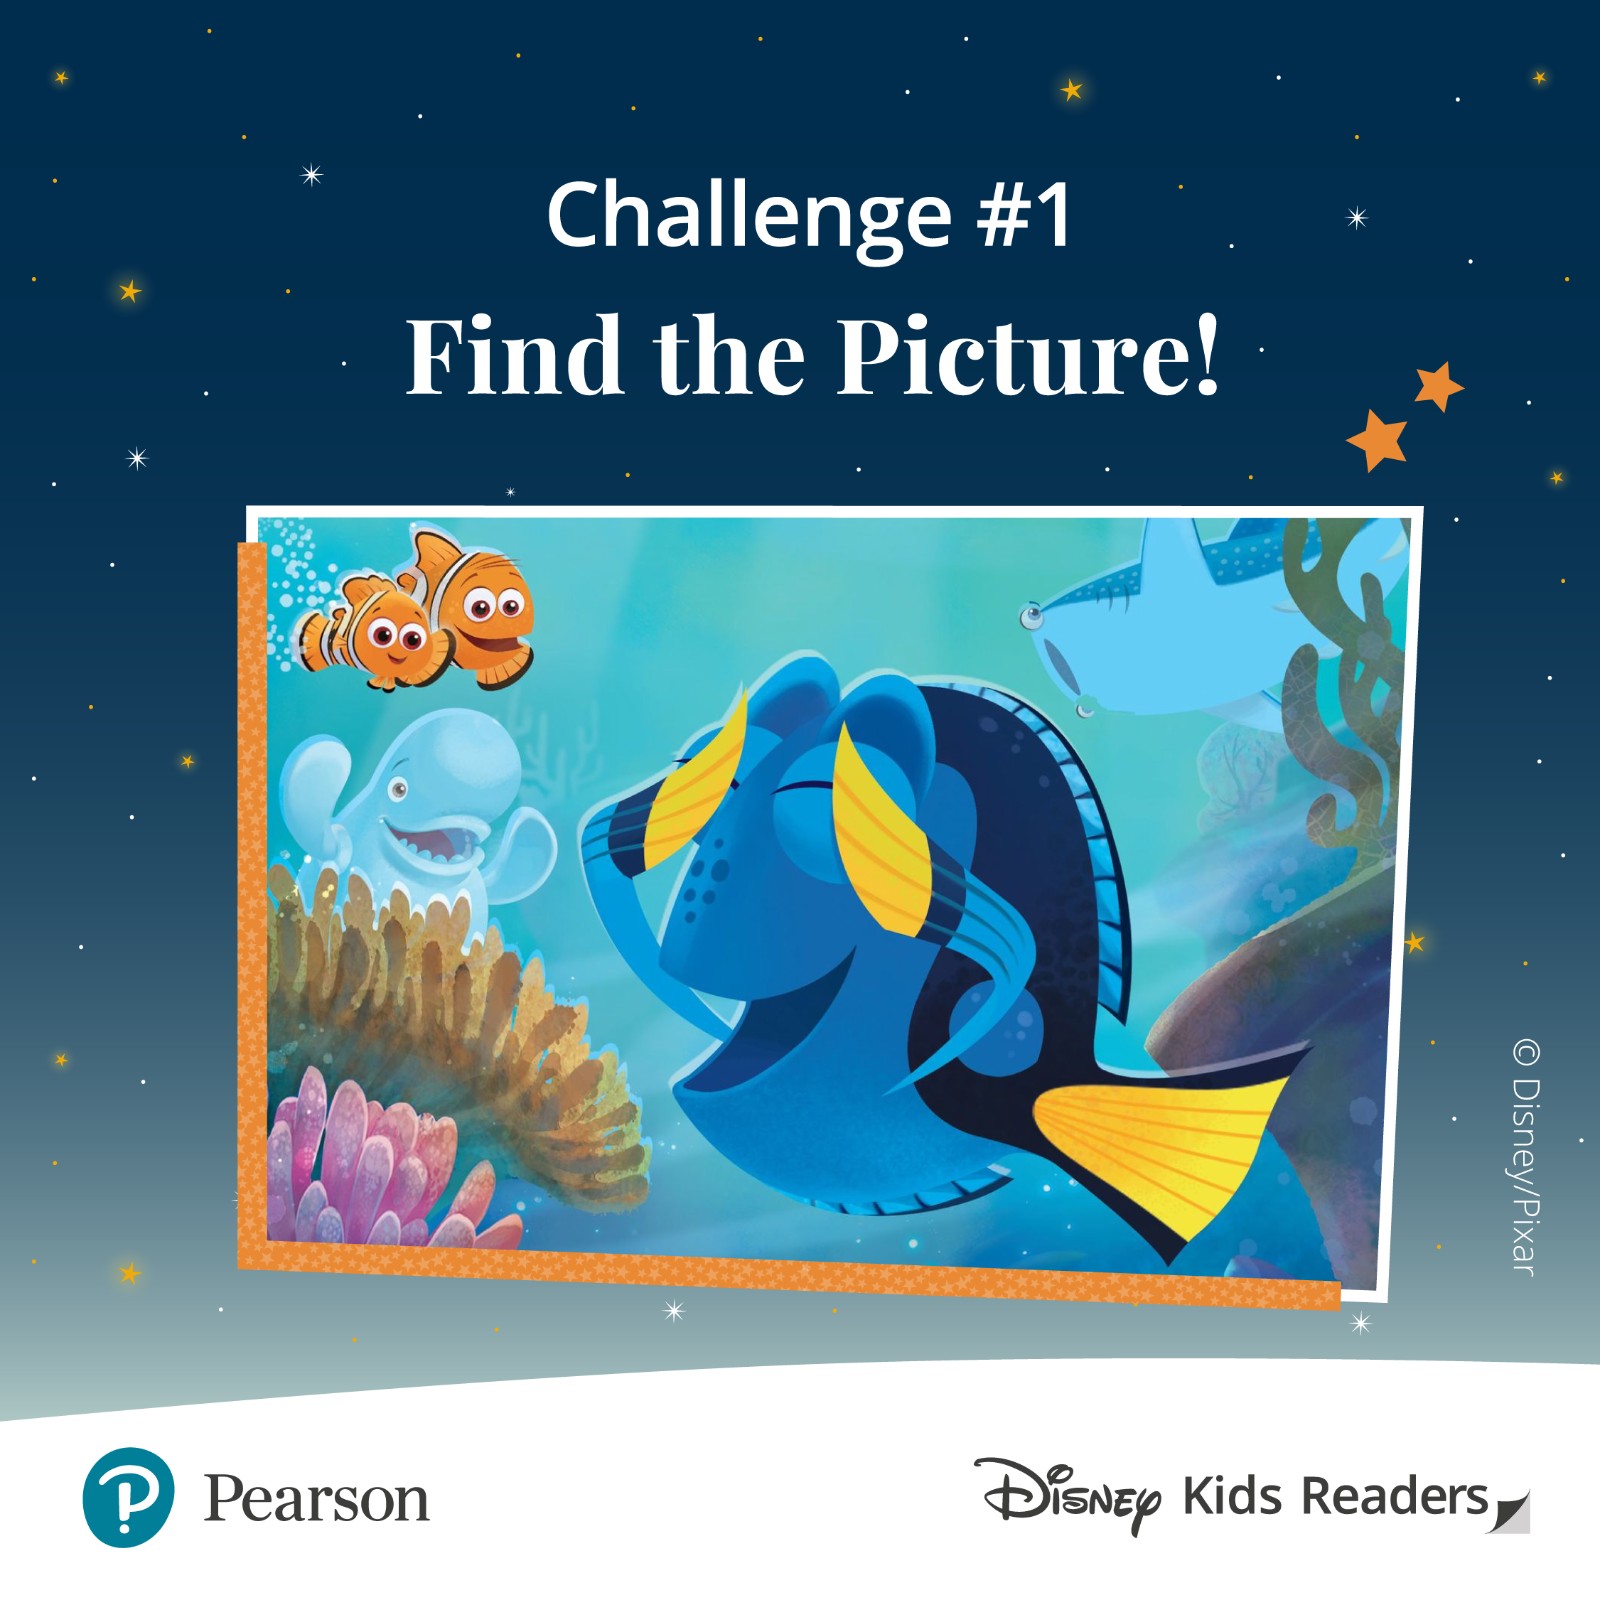 Dory Disney character, Challenge #1 'Find the picture!'